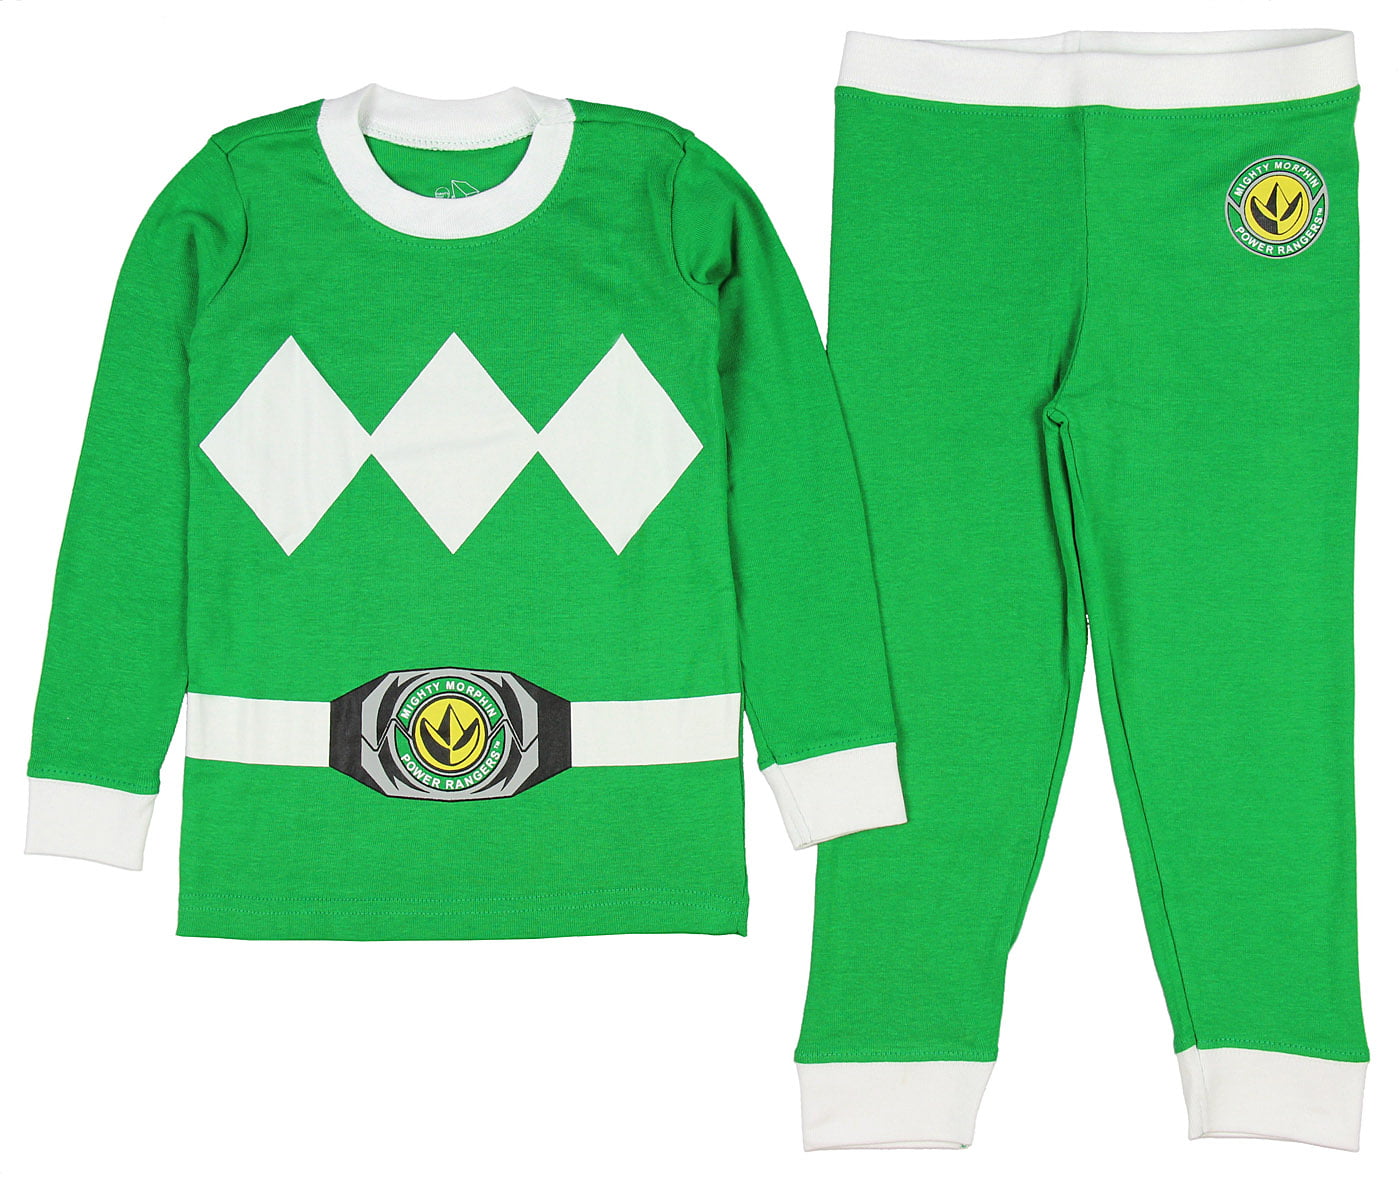 brand new Power Rangers Childrens Cotton Pyjamas Long Sleeved Top and Bottoms 